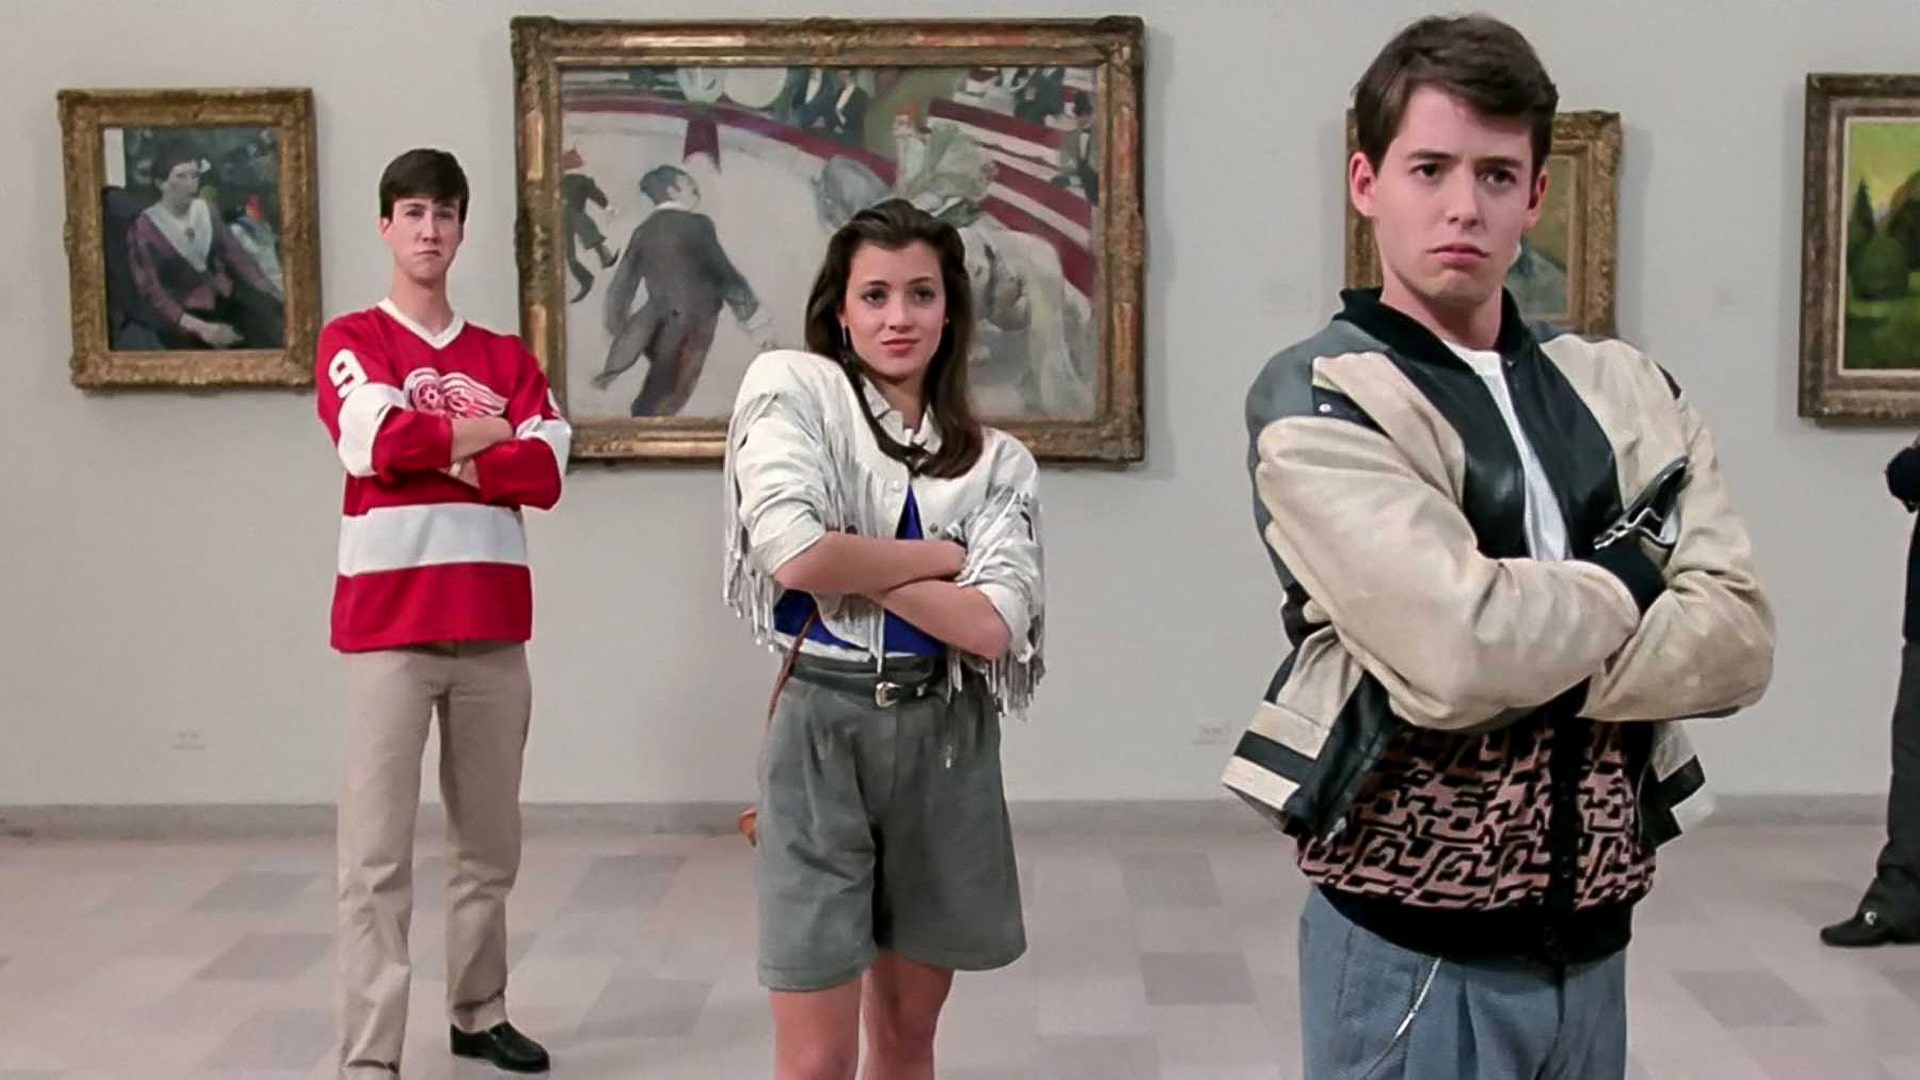 Ferris Bueller’s Day Off Movie - 55 Ferris Bueller’s Day Off (1986) Movie Facts You Haven’t Heard Before 